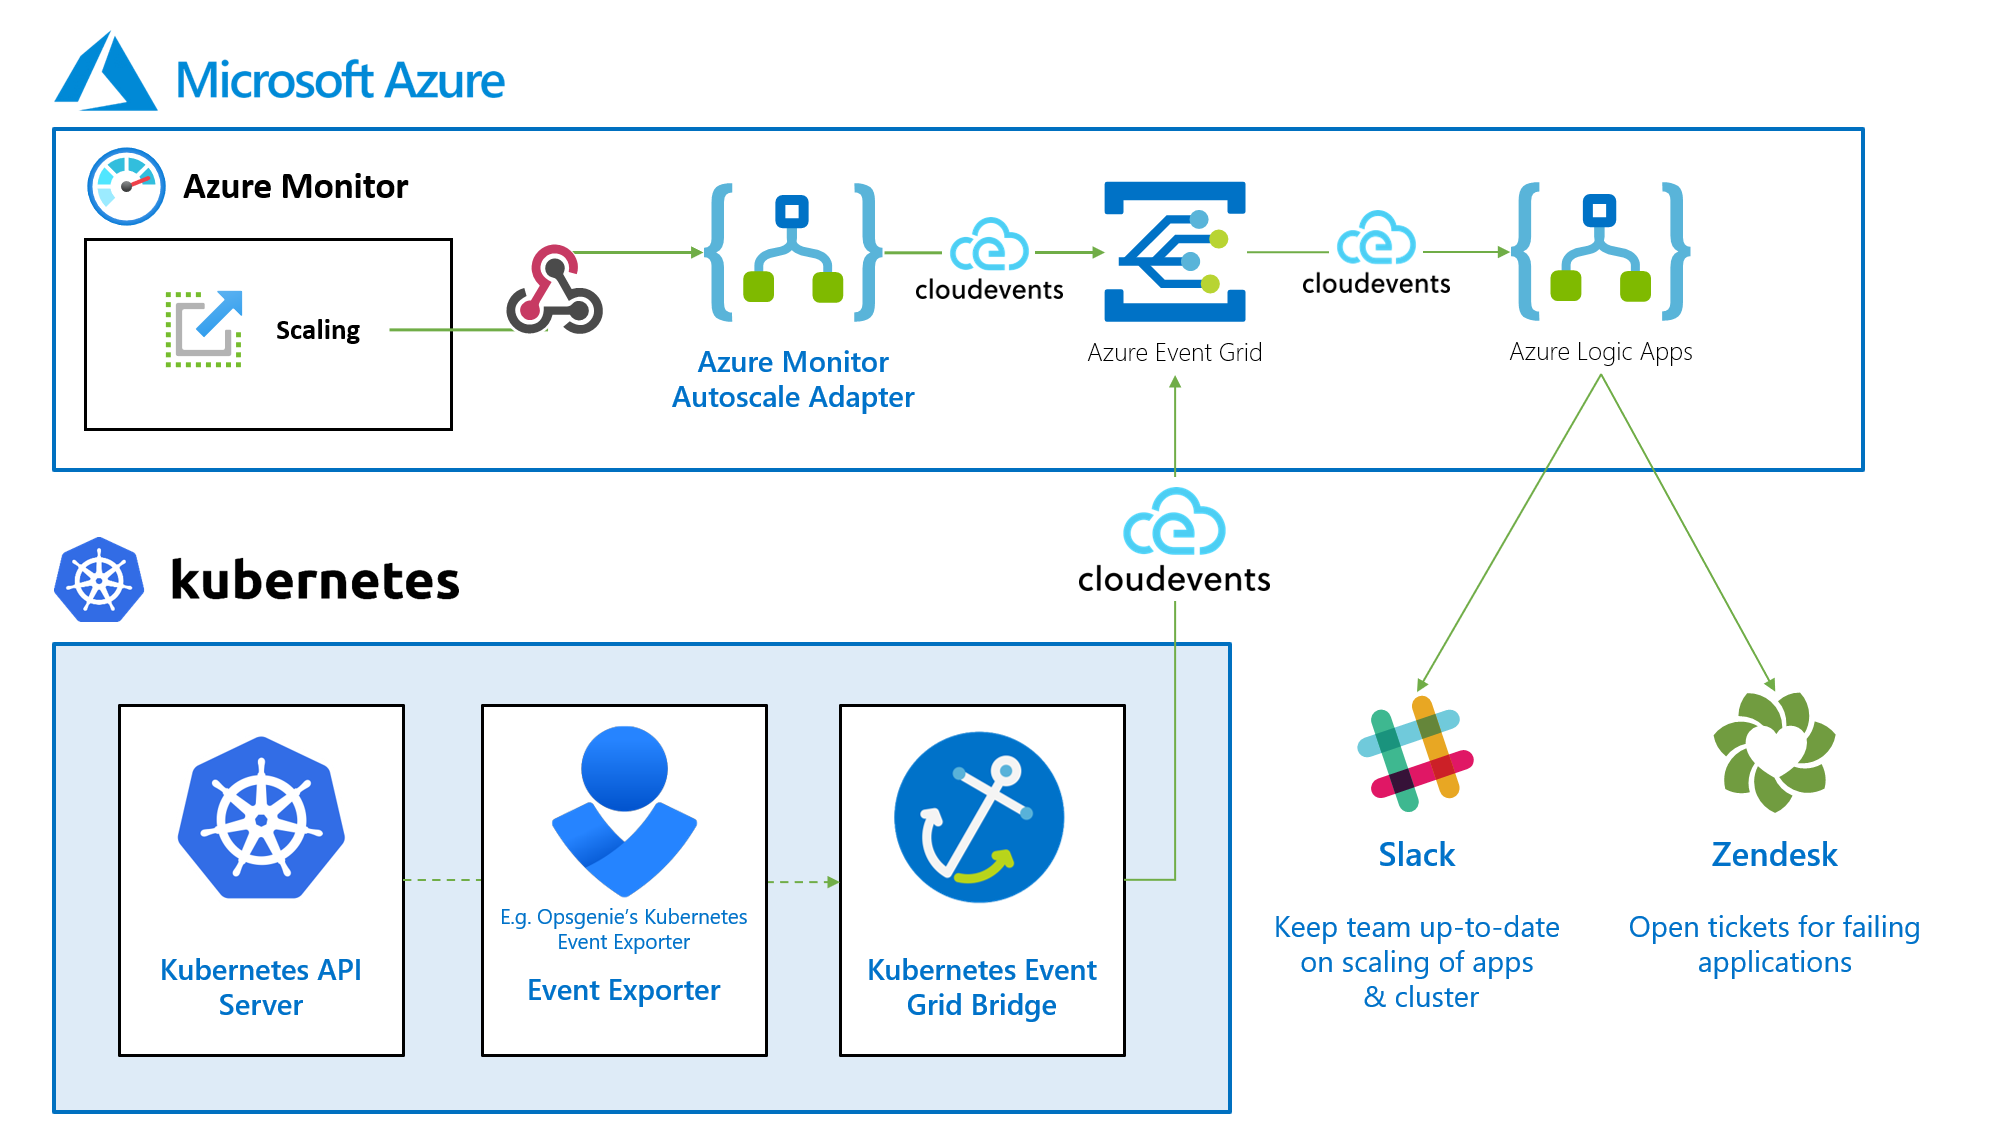 Automatically forwarding Azure Monitor Autoscale events to Azure Event Grid